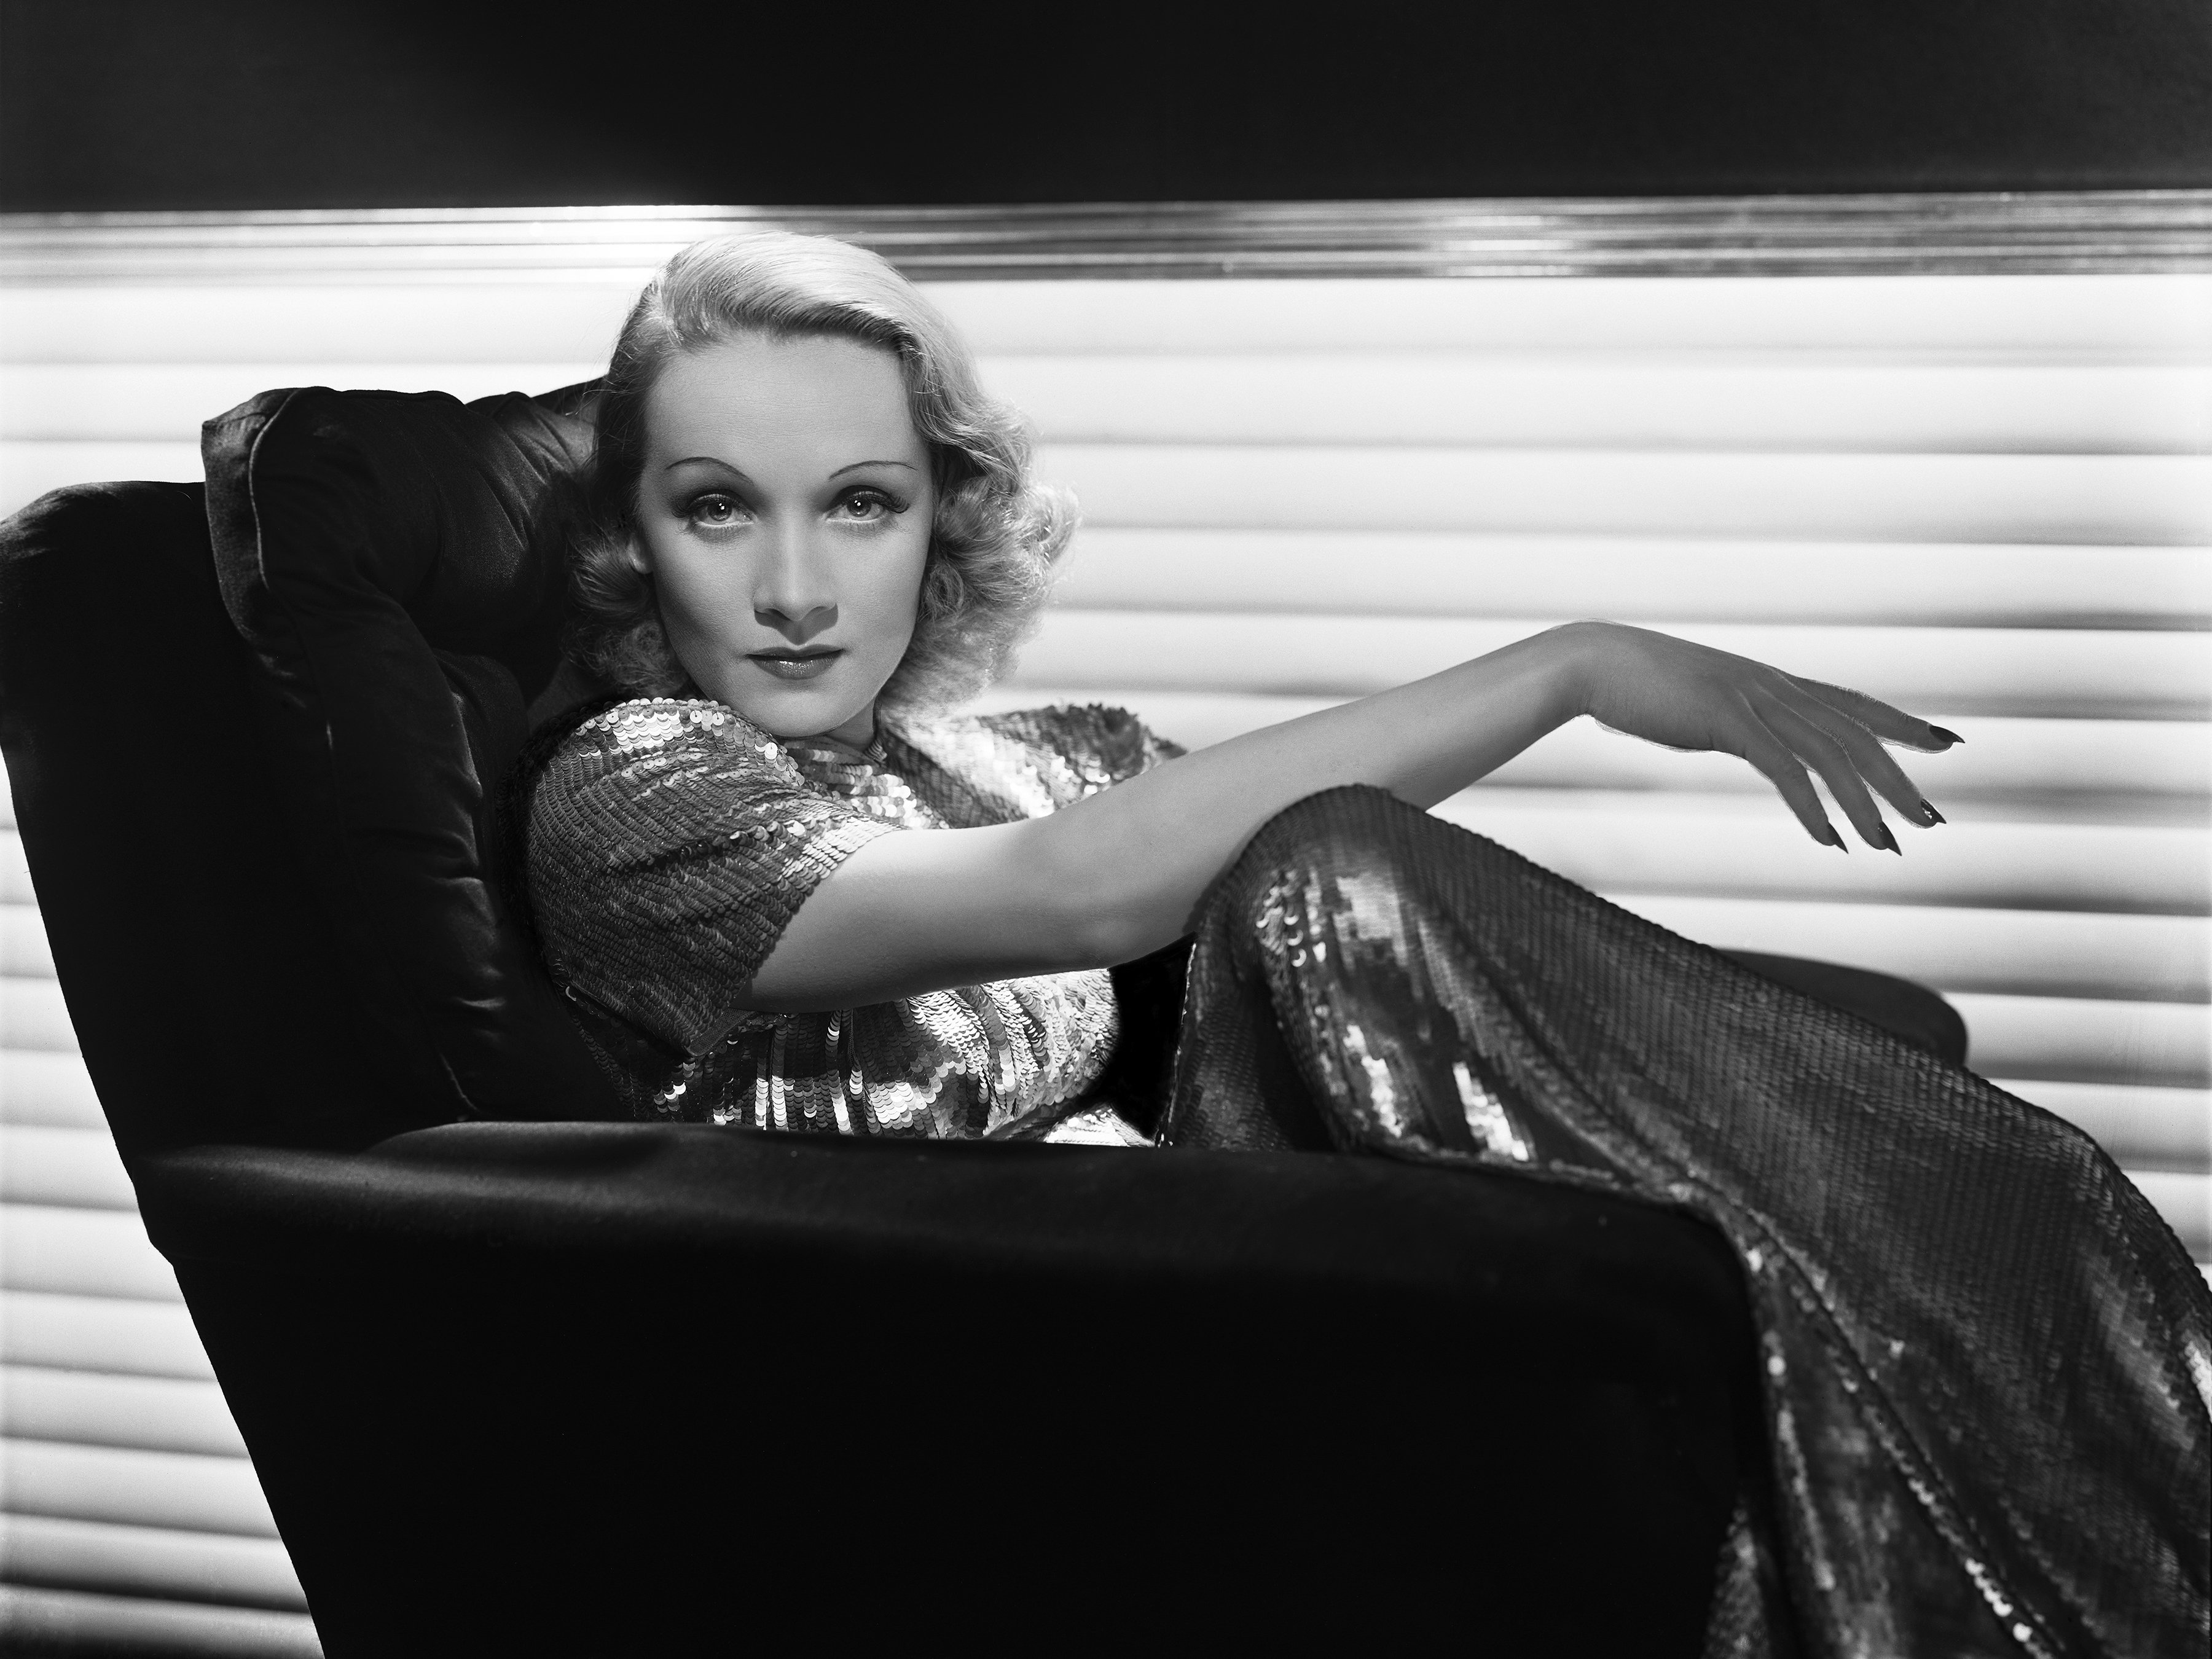 In exhibition, Dietrich exerts a seductive, enigmatic pull